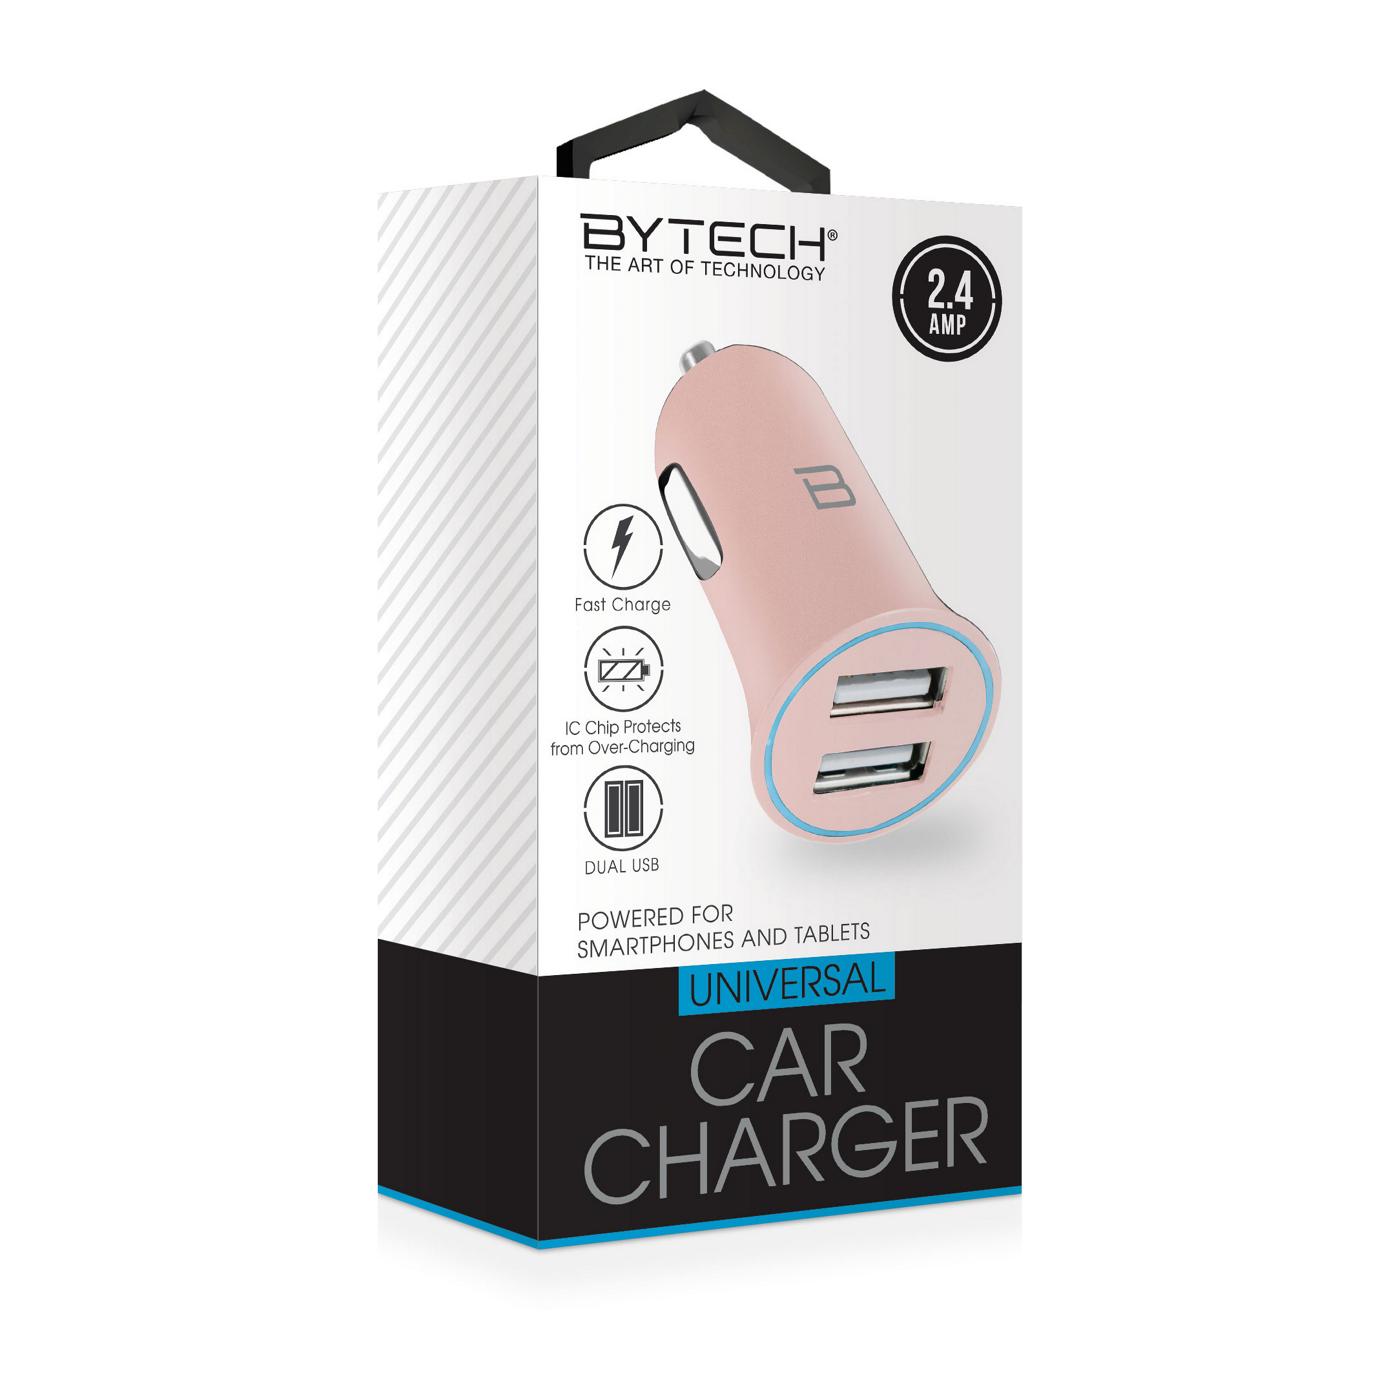 Bytech Dual USB Car Charger; image 1 of 2